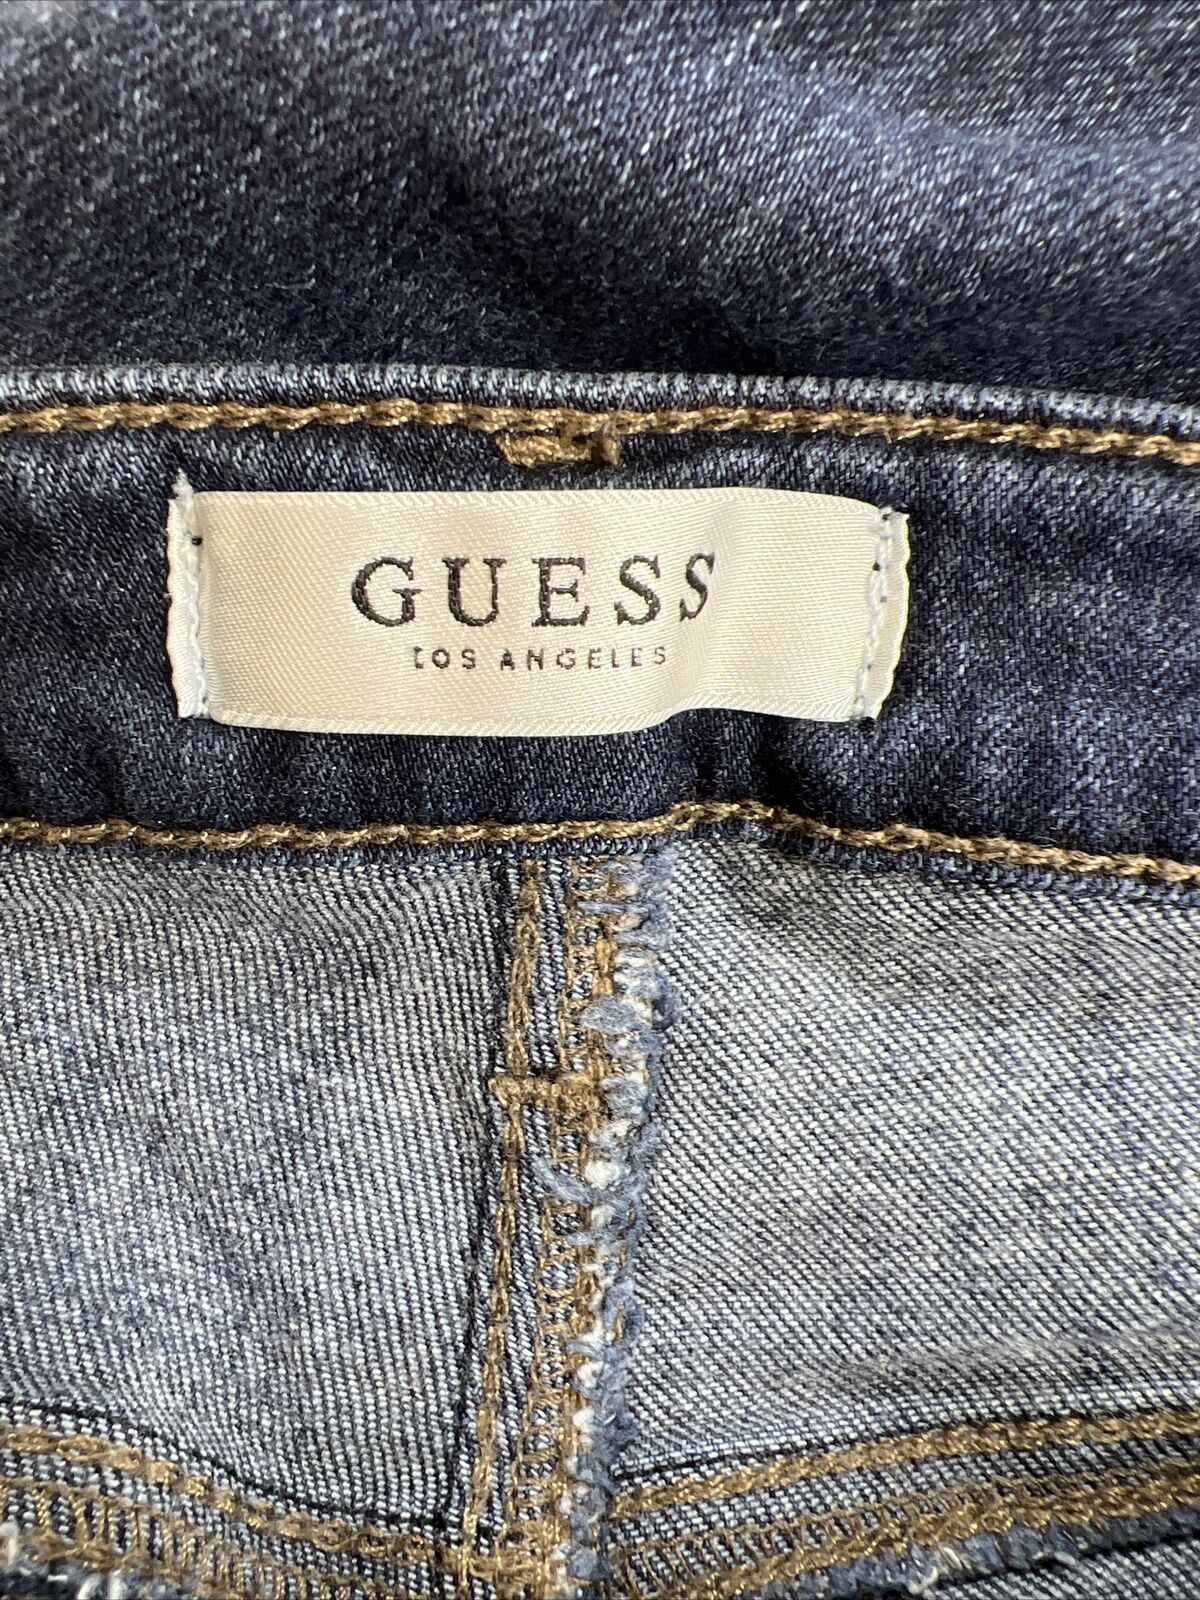 Guess Women's Dark Wash Sexy Curve Skinny Jeans - 27